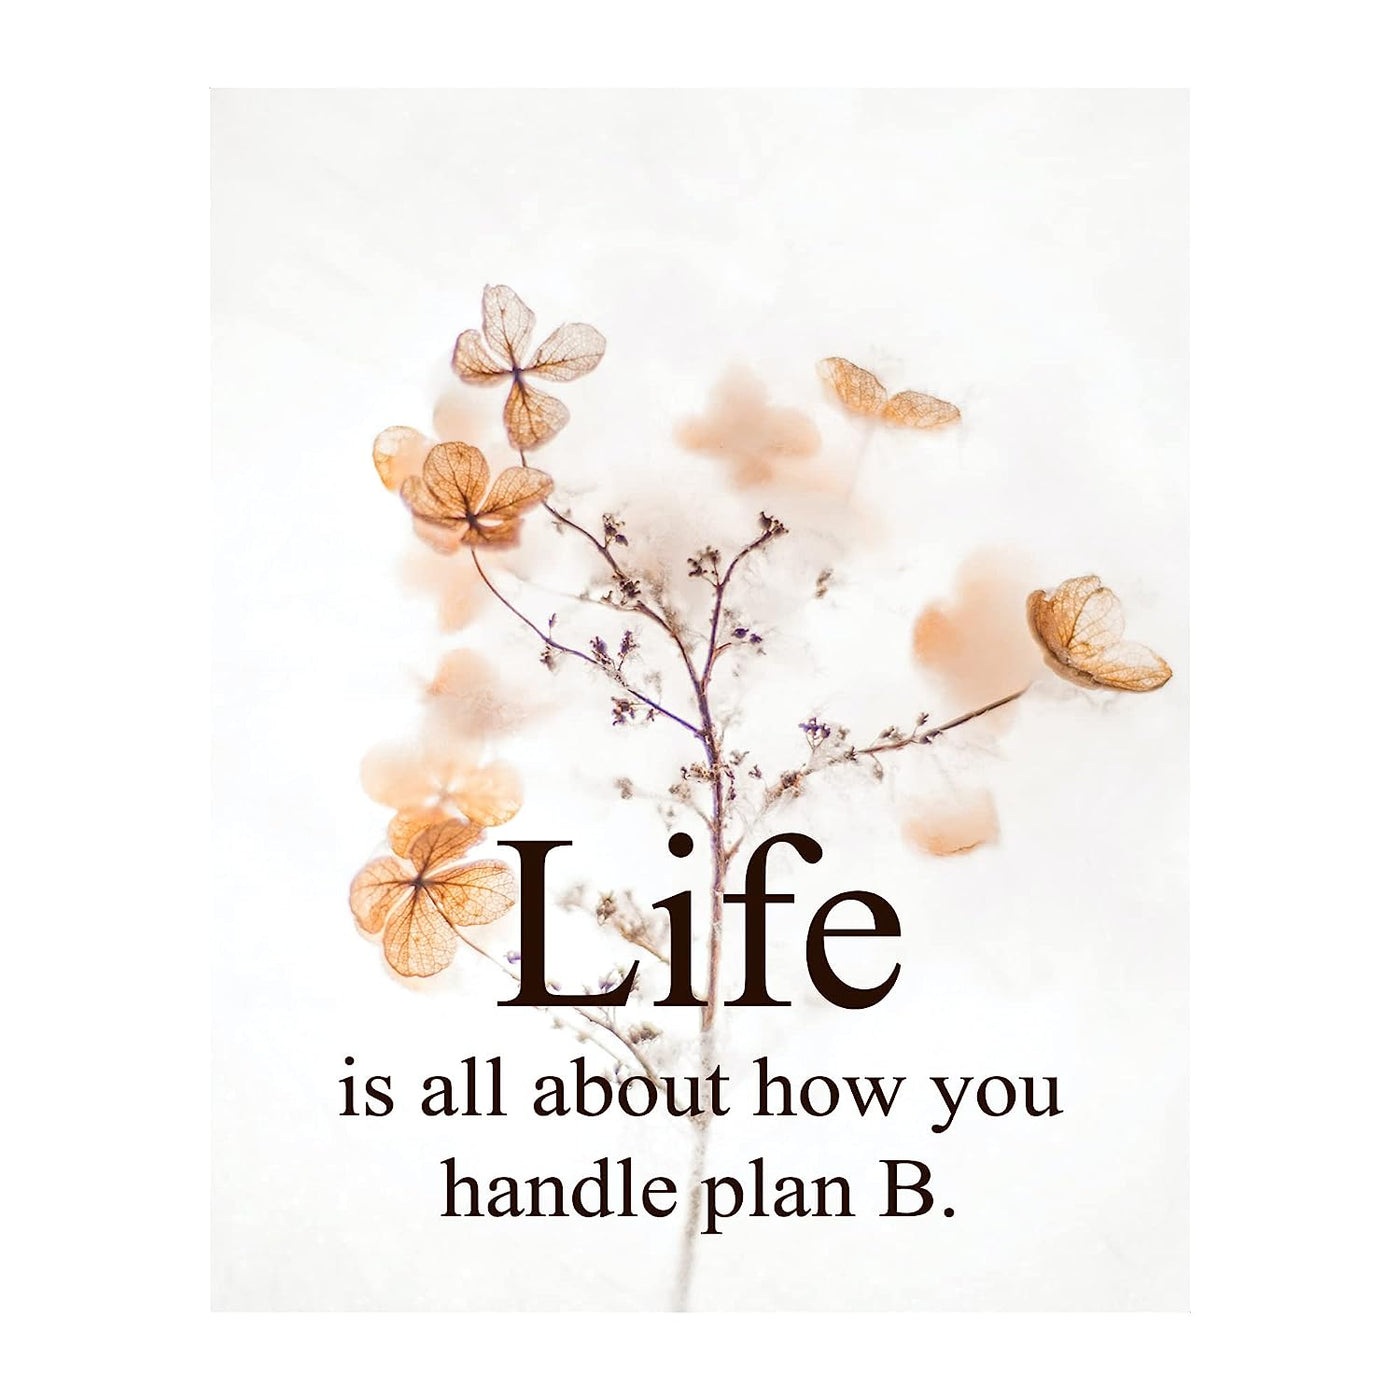 Life All About How You Handle Plan B-Inspirational Quotes Wall Art-8x10" Floral Typographic Photo Print-Ready to Frame. Motivational Home-Office-Studio-Dorm Decor. Great Gift of Inspiration!